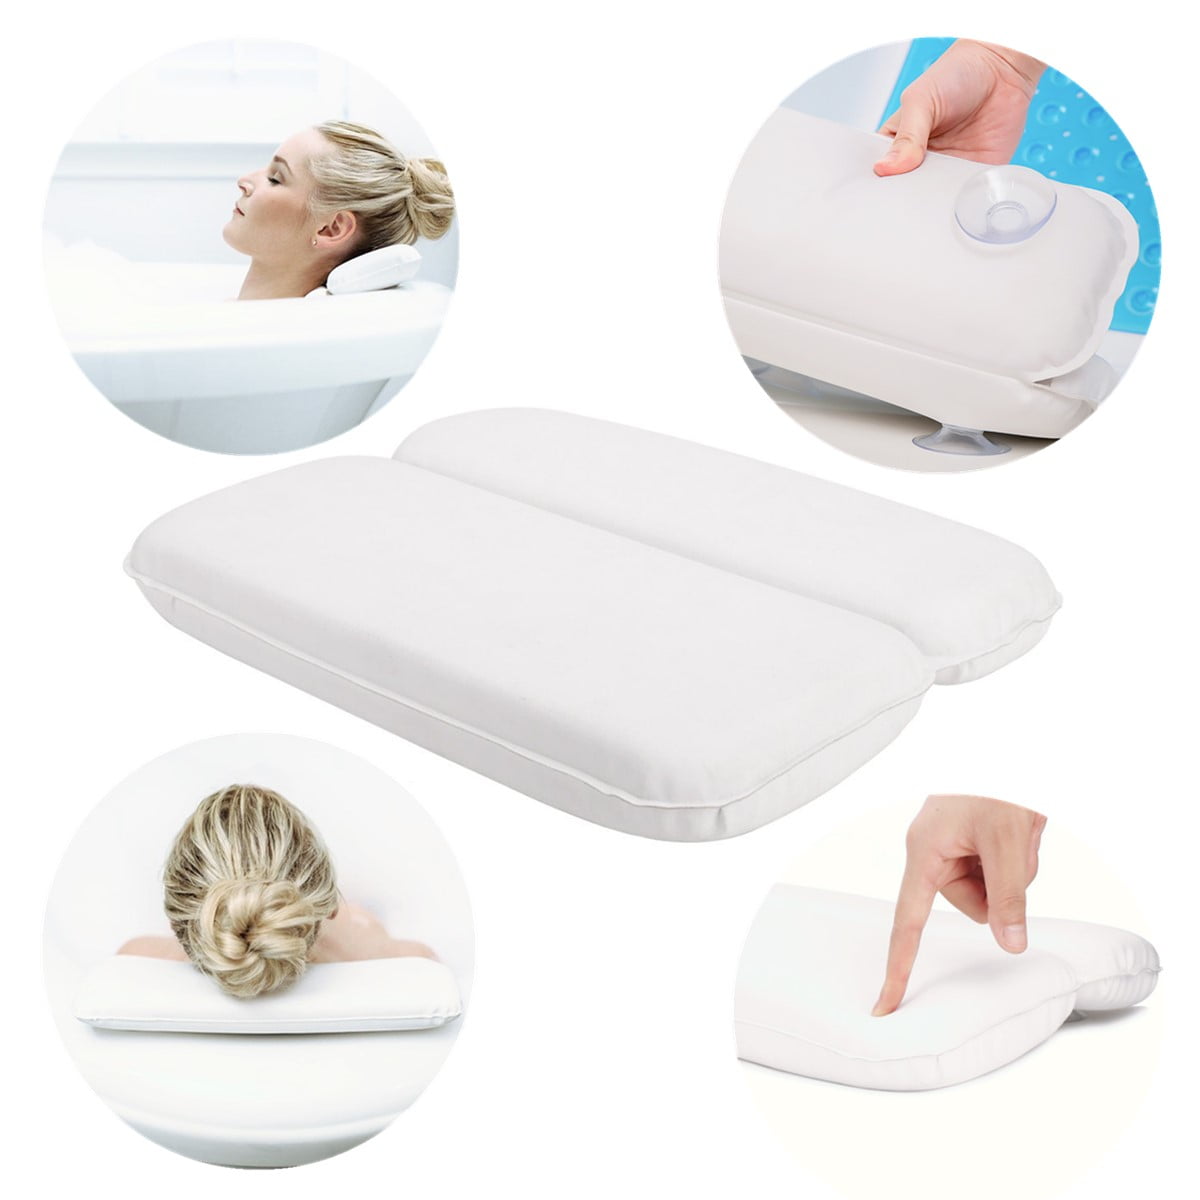 2 X Luxury Memory Foam Bath Pillow Soothe Relax Suction Cups Headrest High Quali 